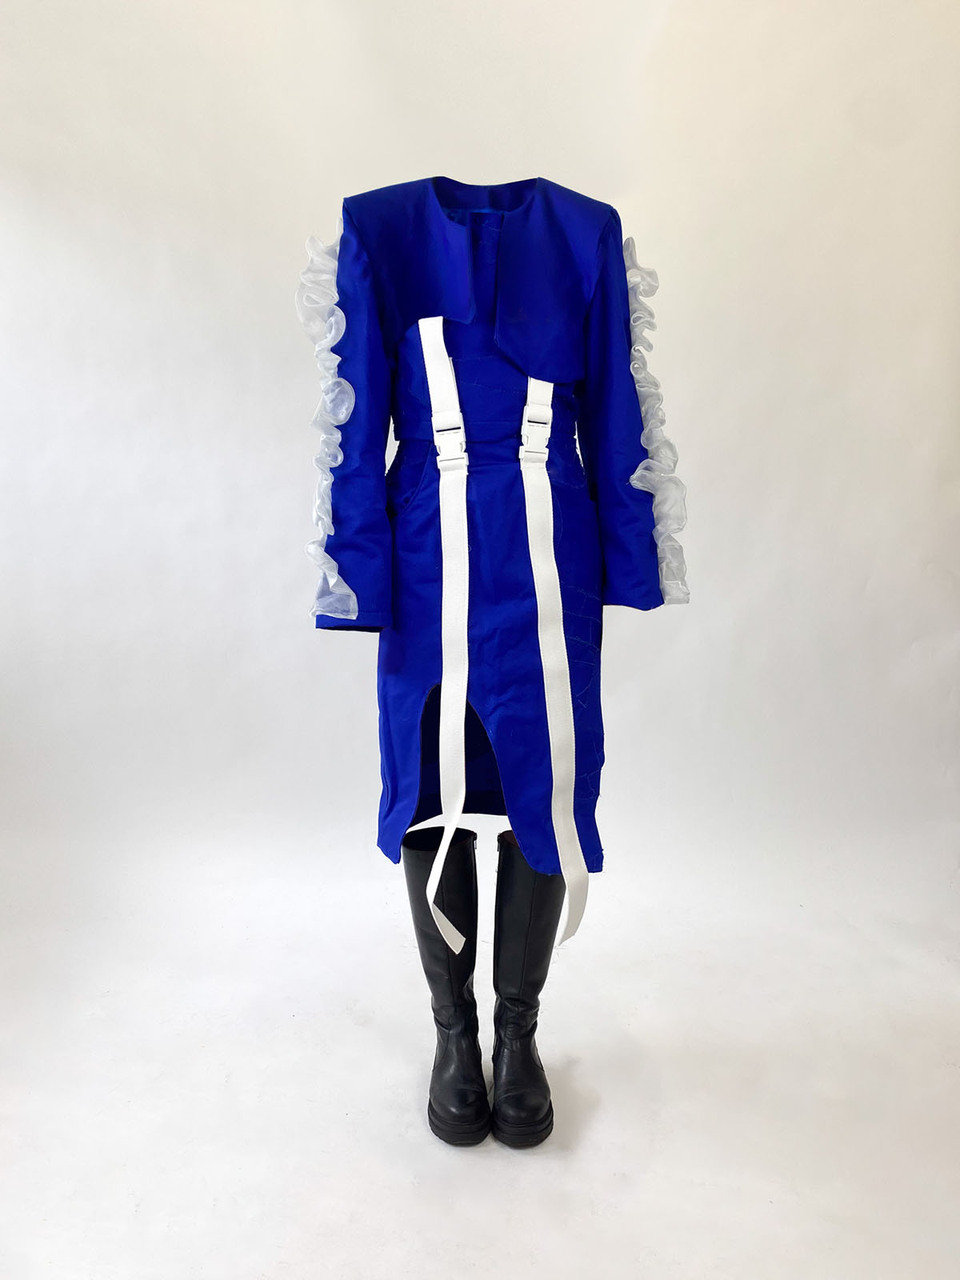 Blue collarless skirt suit with full length vertical white braces in front, crimped white lace details on the outer sleeves and knee length black flat soled boots by Gosia Czerwinska